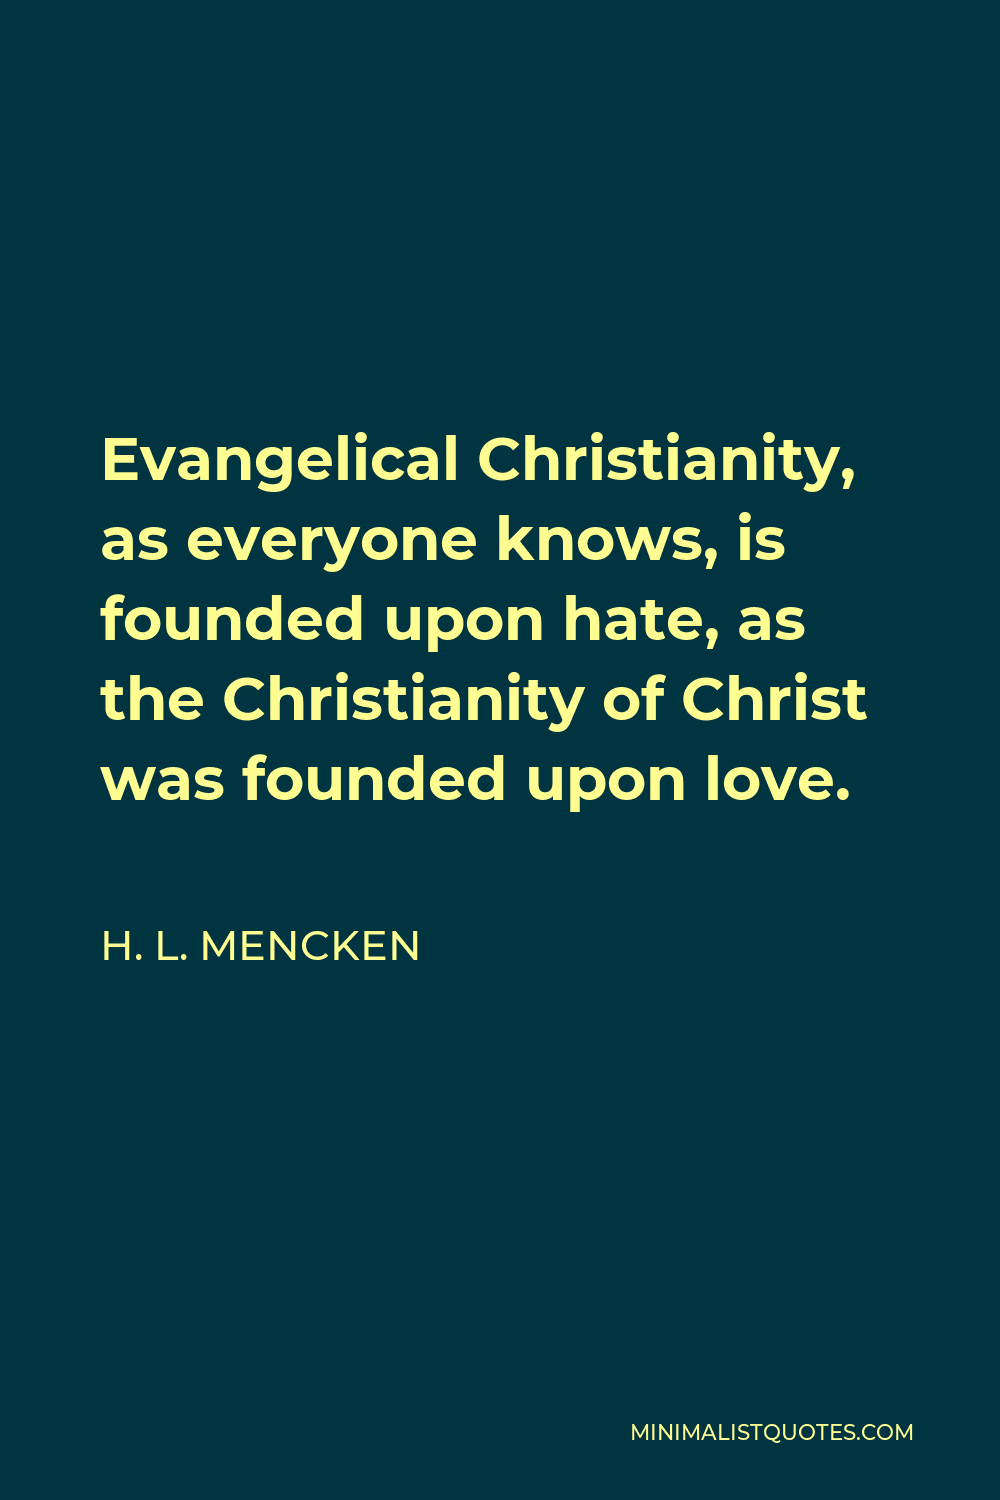 H. L. Mencken Quote - Evangelical Christianity, as everyone knows, is founded upon hate, as the Christianity of Christ was founded upon love.